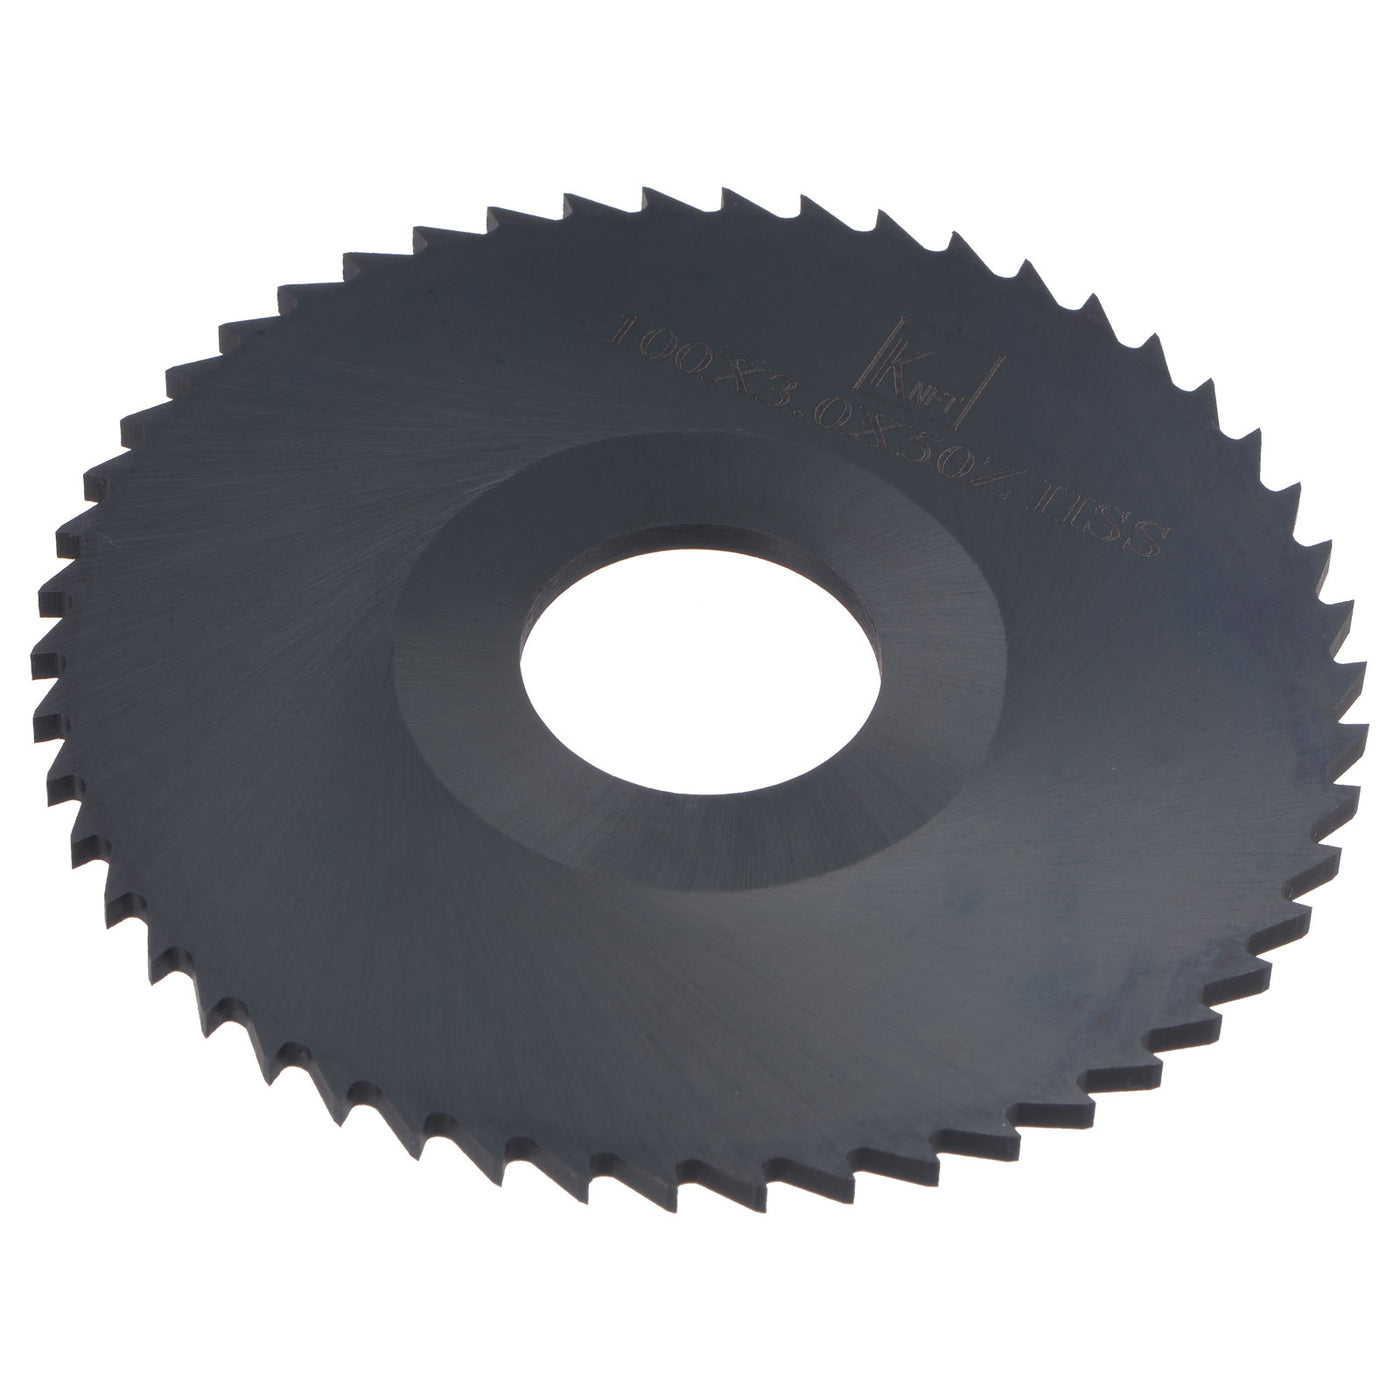 Uxcell Uxcell 100mm Dia 27mm Arbor 3mm Thick 50 Tooth Nitriding Circular Saw Blade Cutter